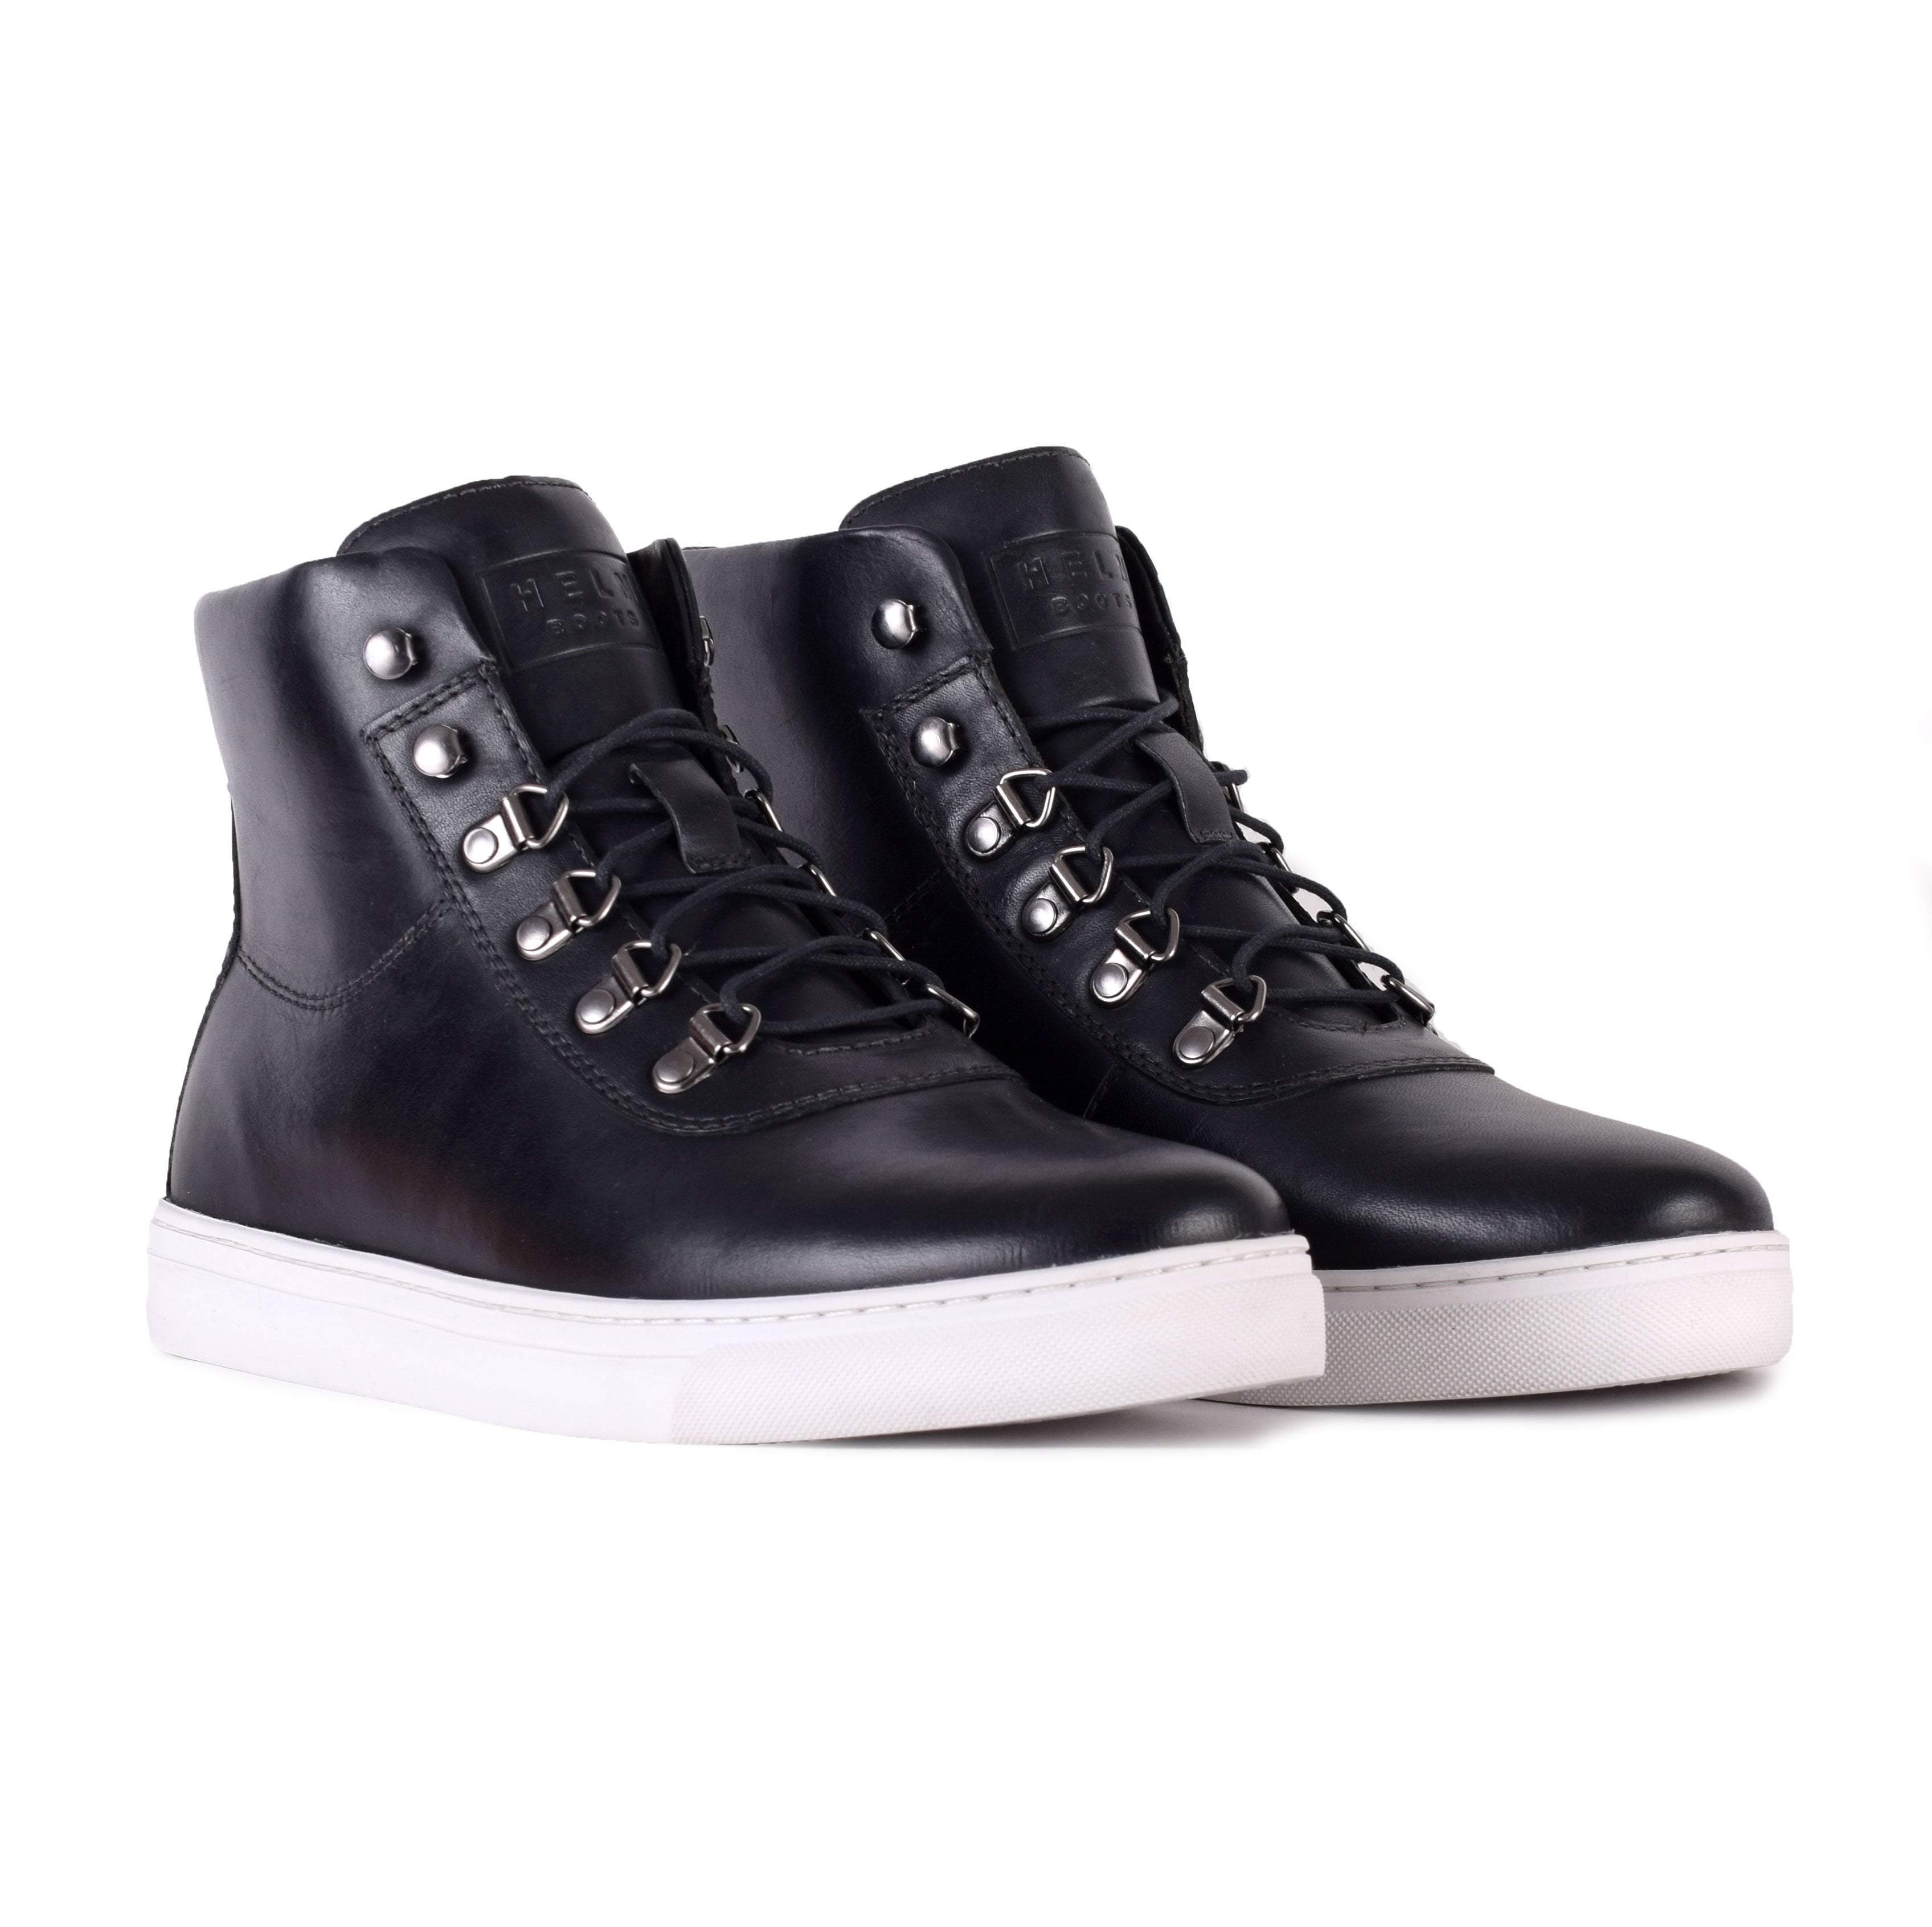 Charlie Sneaker Boot - Shoes